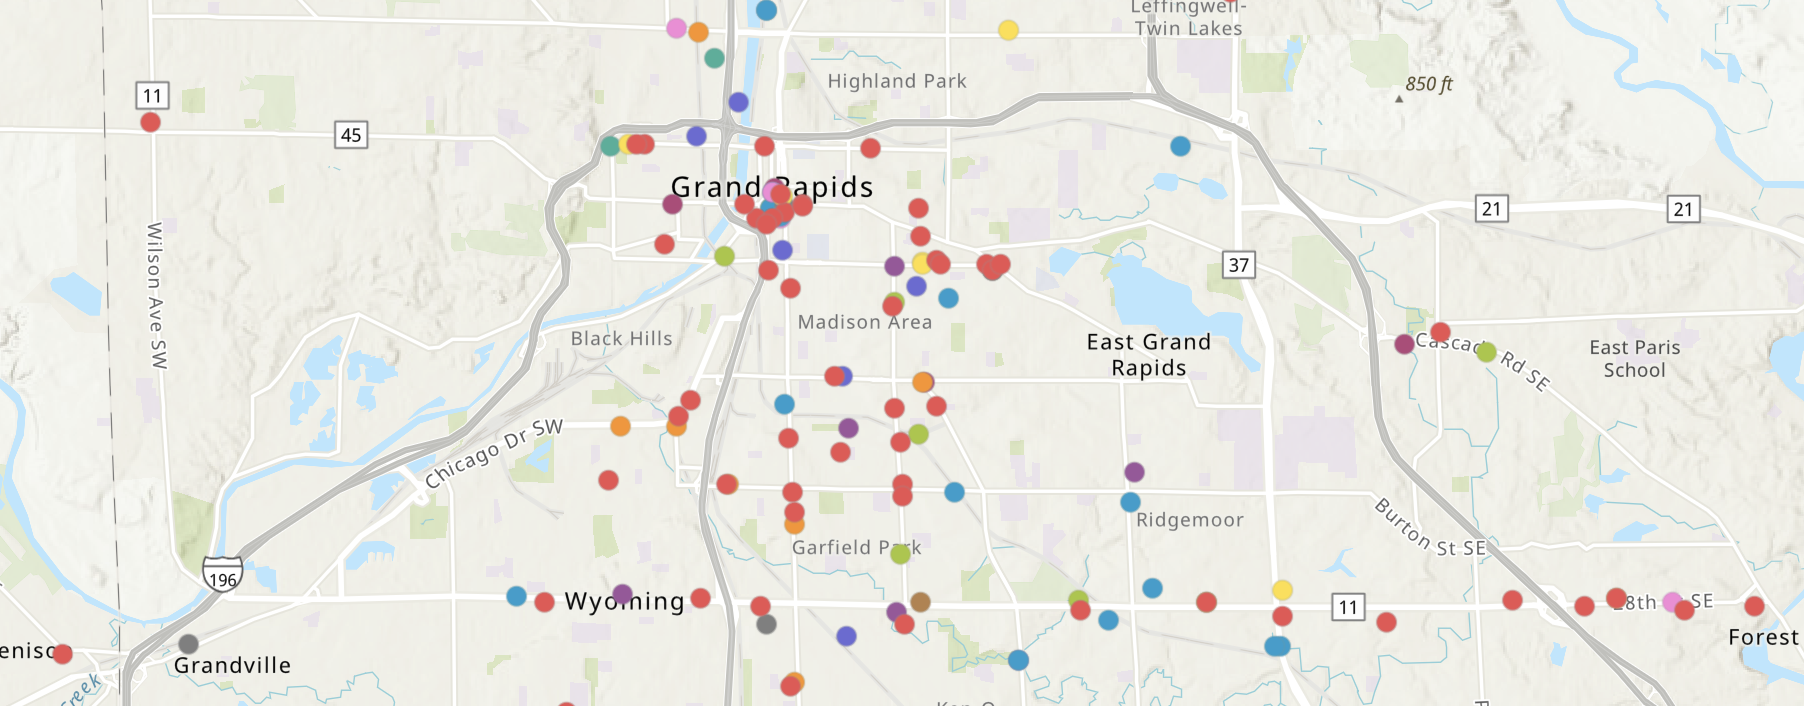 A screen shot of the BIPOC-Owned Businesses Map of Greater Grand Rapids. It shows a map of Grand Rapids with dots representing locations of BIPOC-owned businesses and organizations.